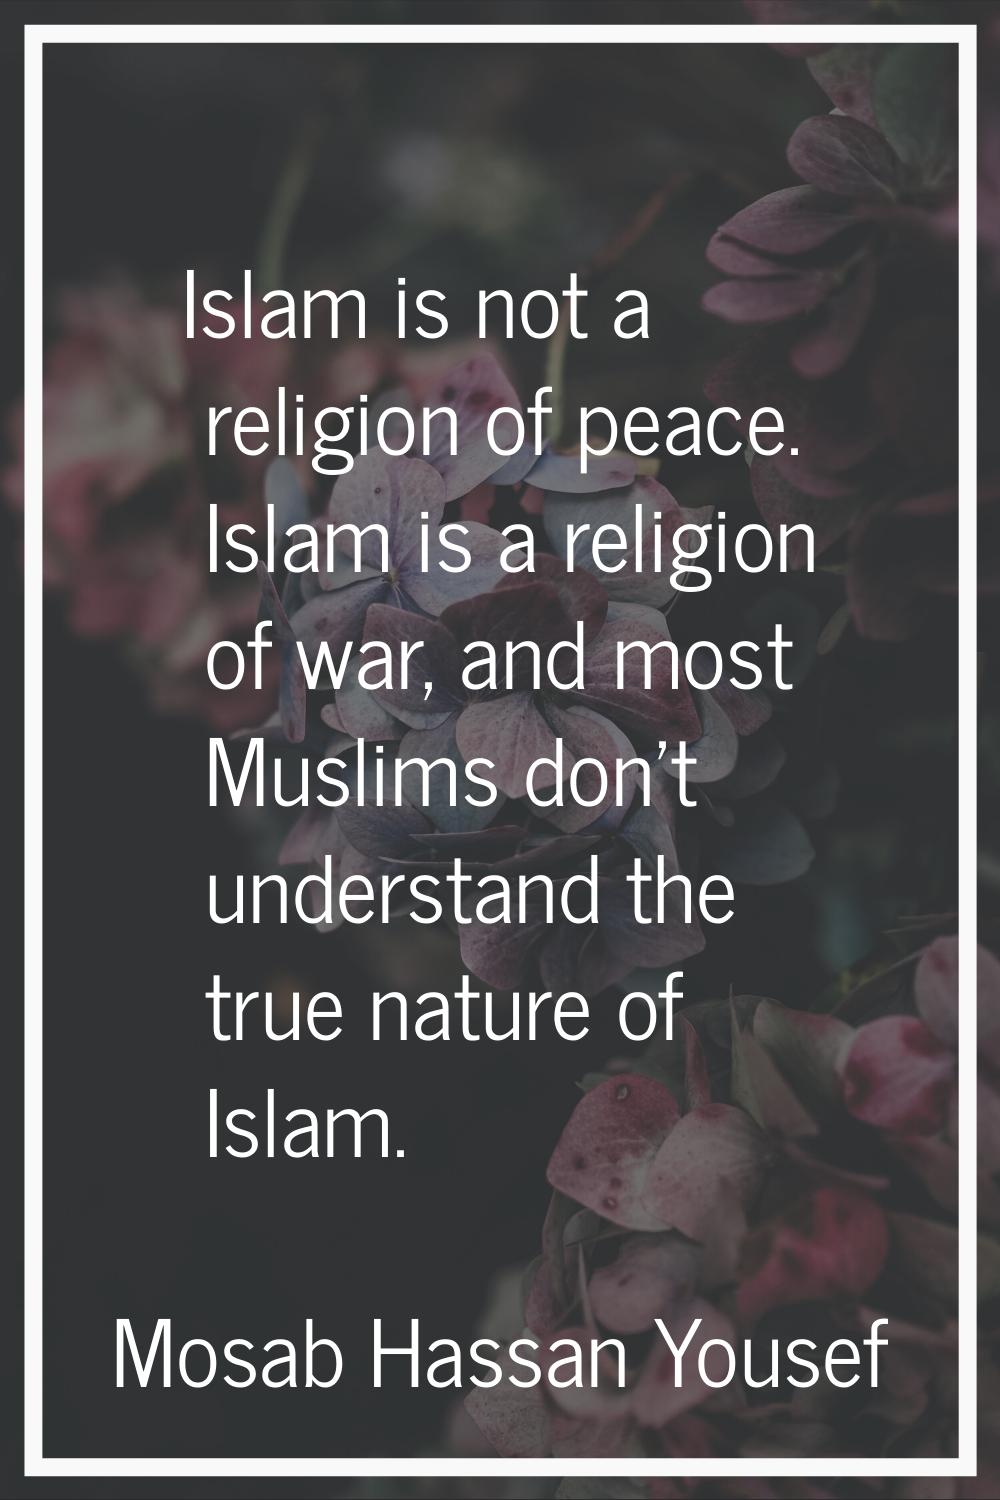 Islam is not a religion of peace. Islam is a religion of war, and most Muslims don't understand the